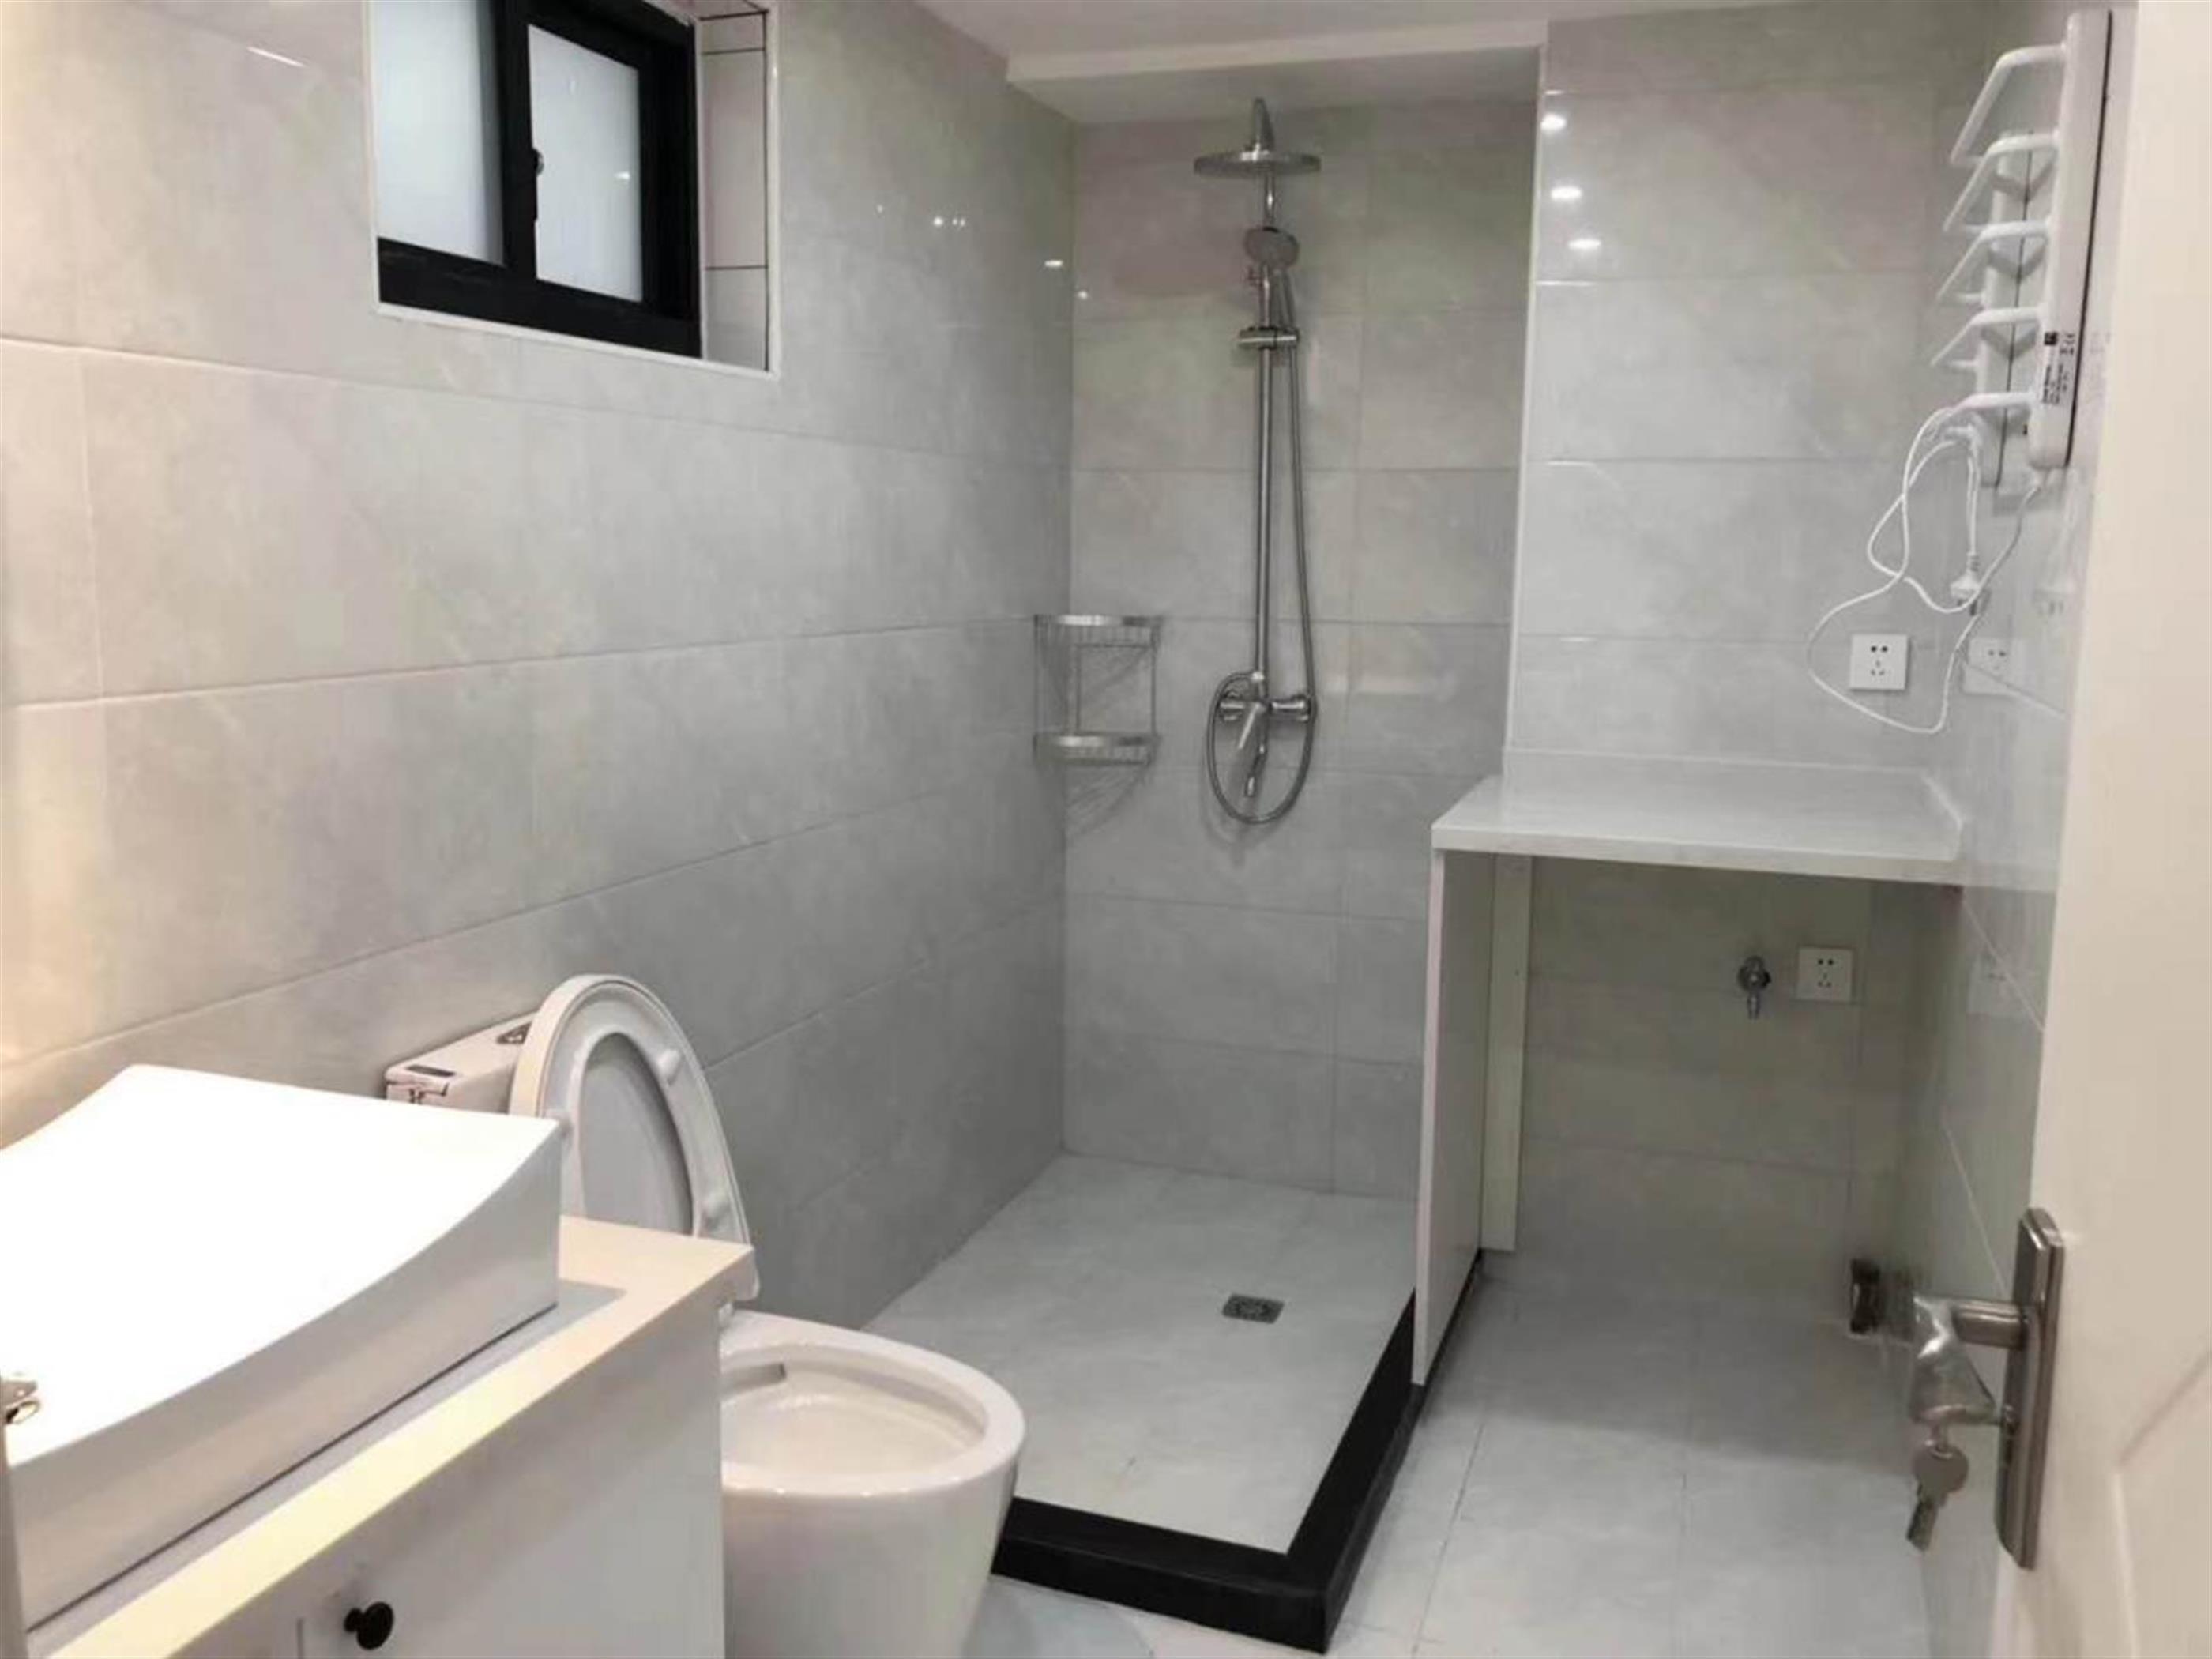 clean bathroom Renovated Bright Affordable 2BR Apt Nr LN 3/4/11/13 for Rent in Shanghai